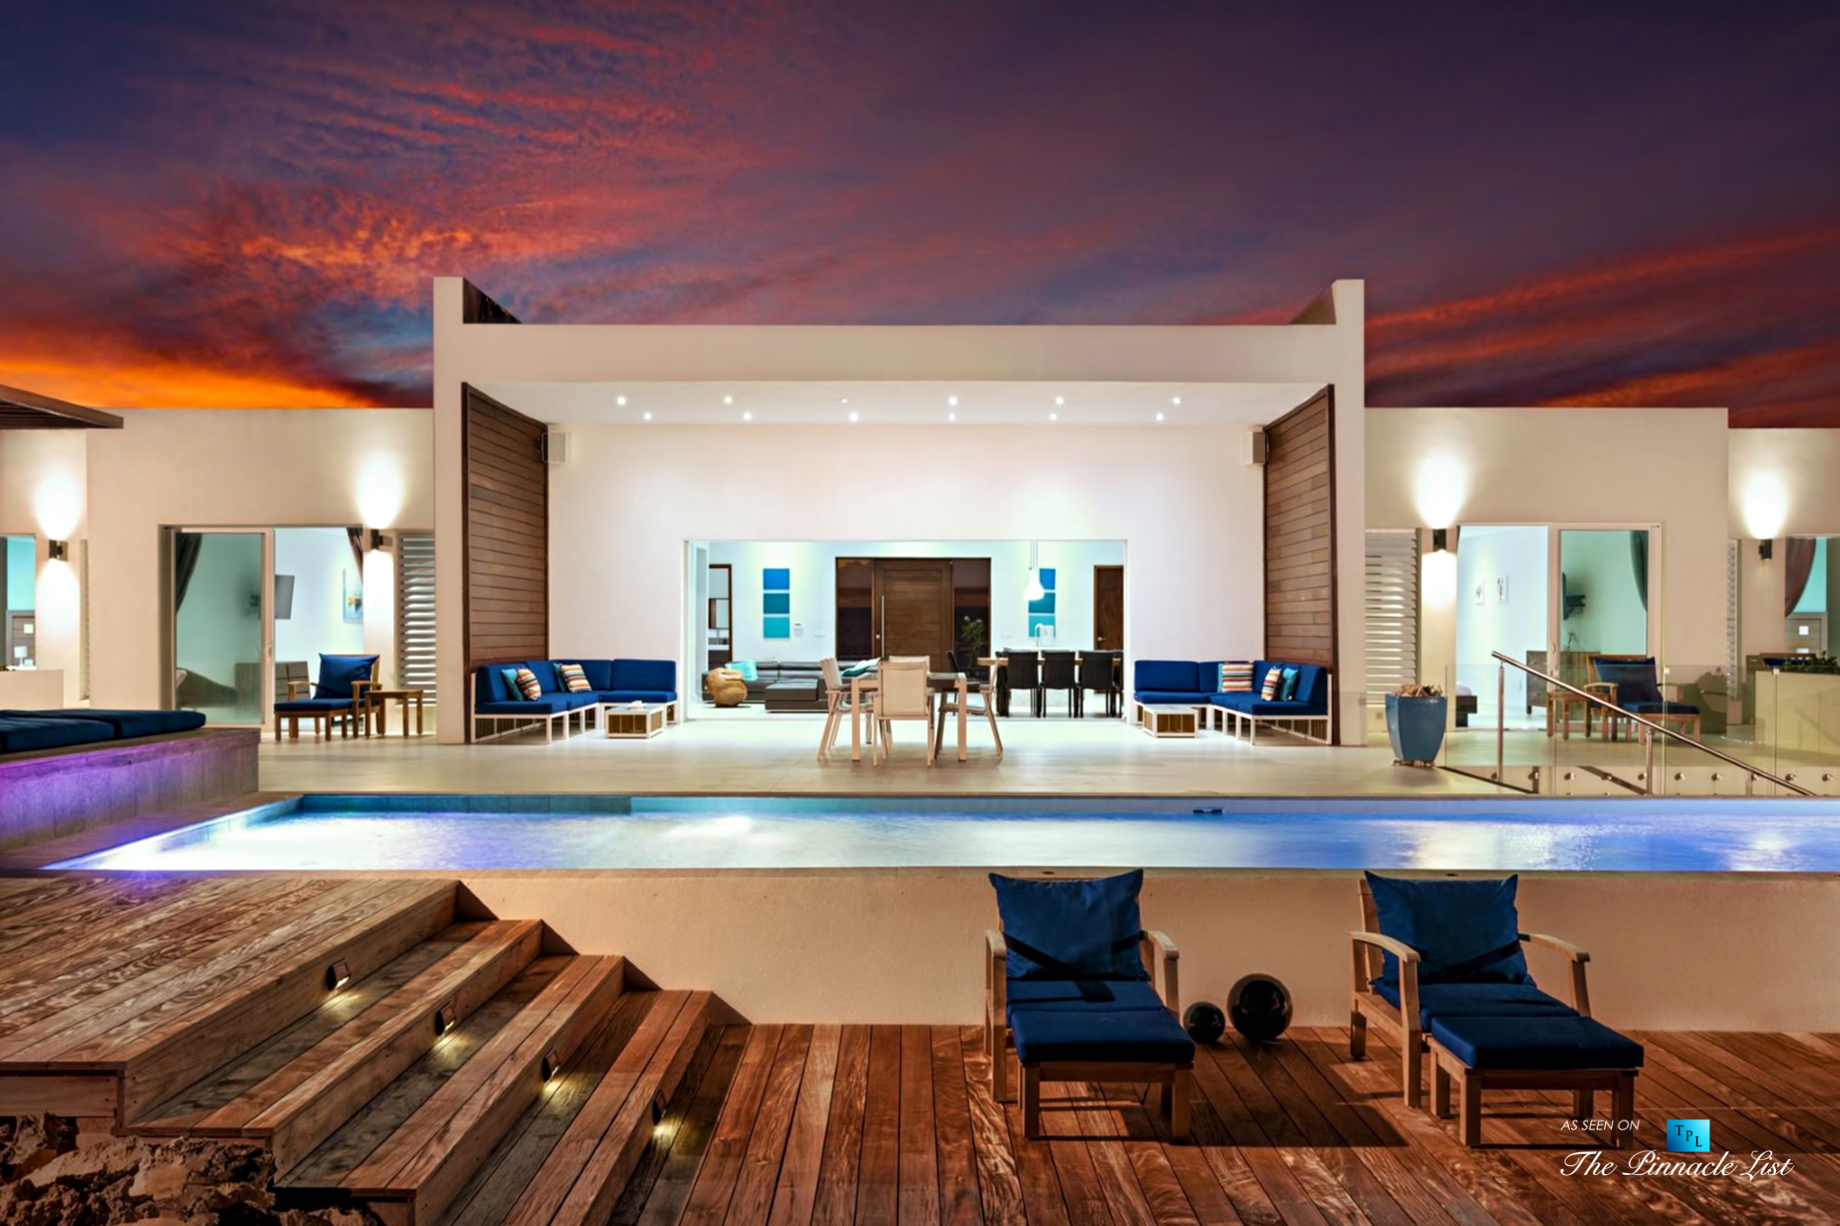 Tip of the Tail Villa - Providenciales, Turks and Caicos Islands - Caribbean Villa Oceanfront Sunset View - Luxury Real Estate - South Shore Peninsula Home